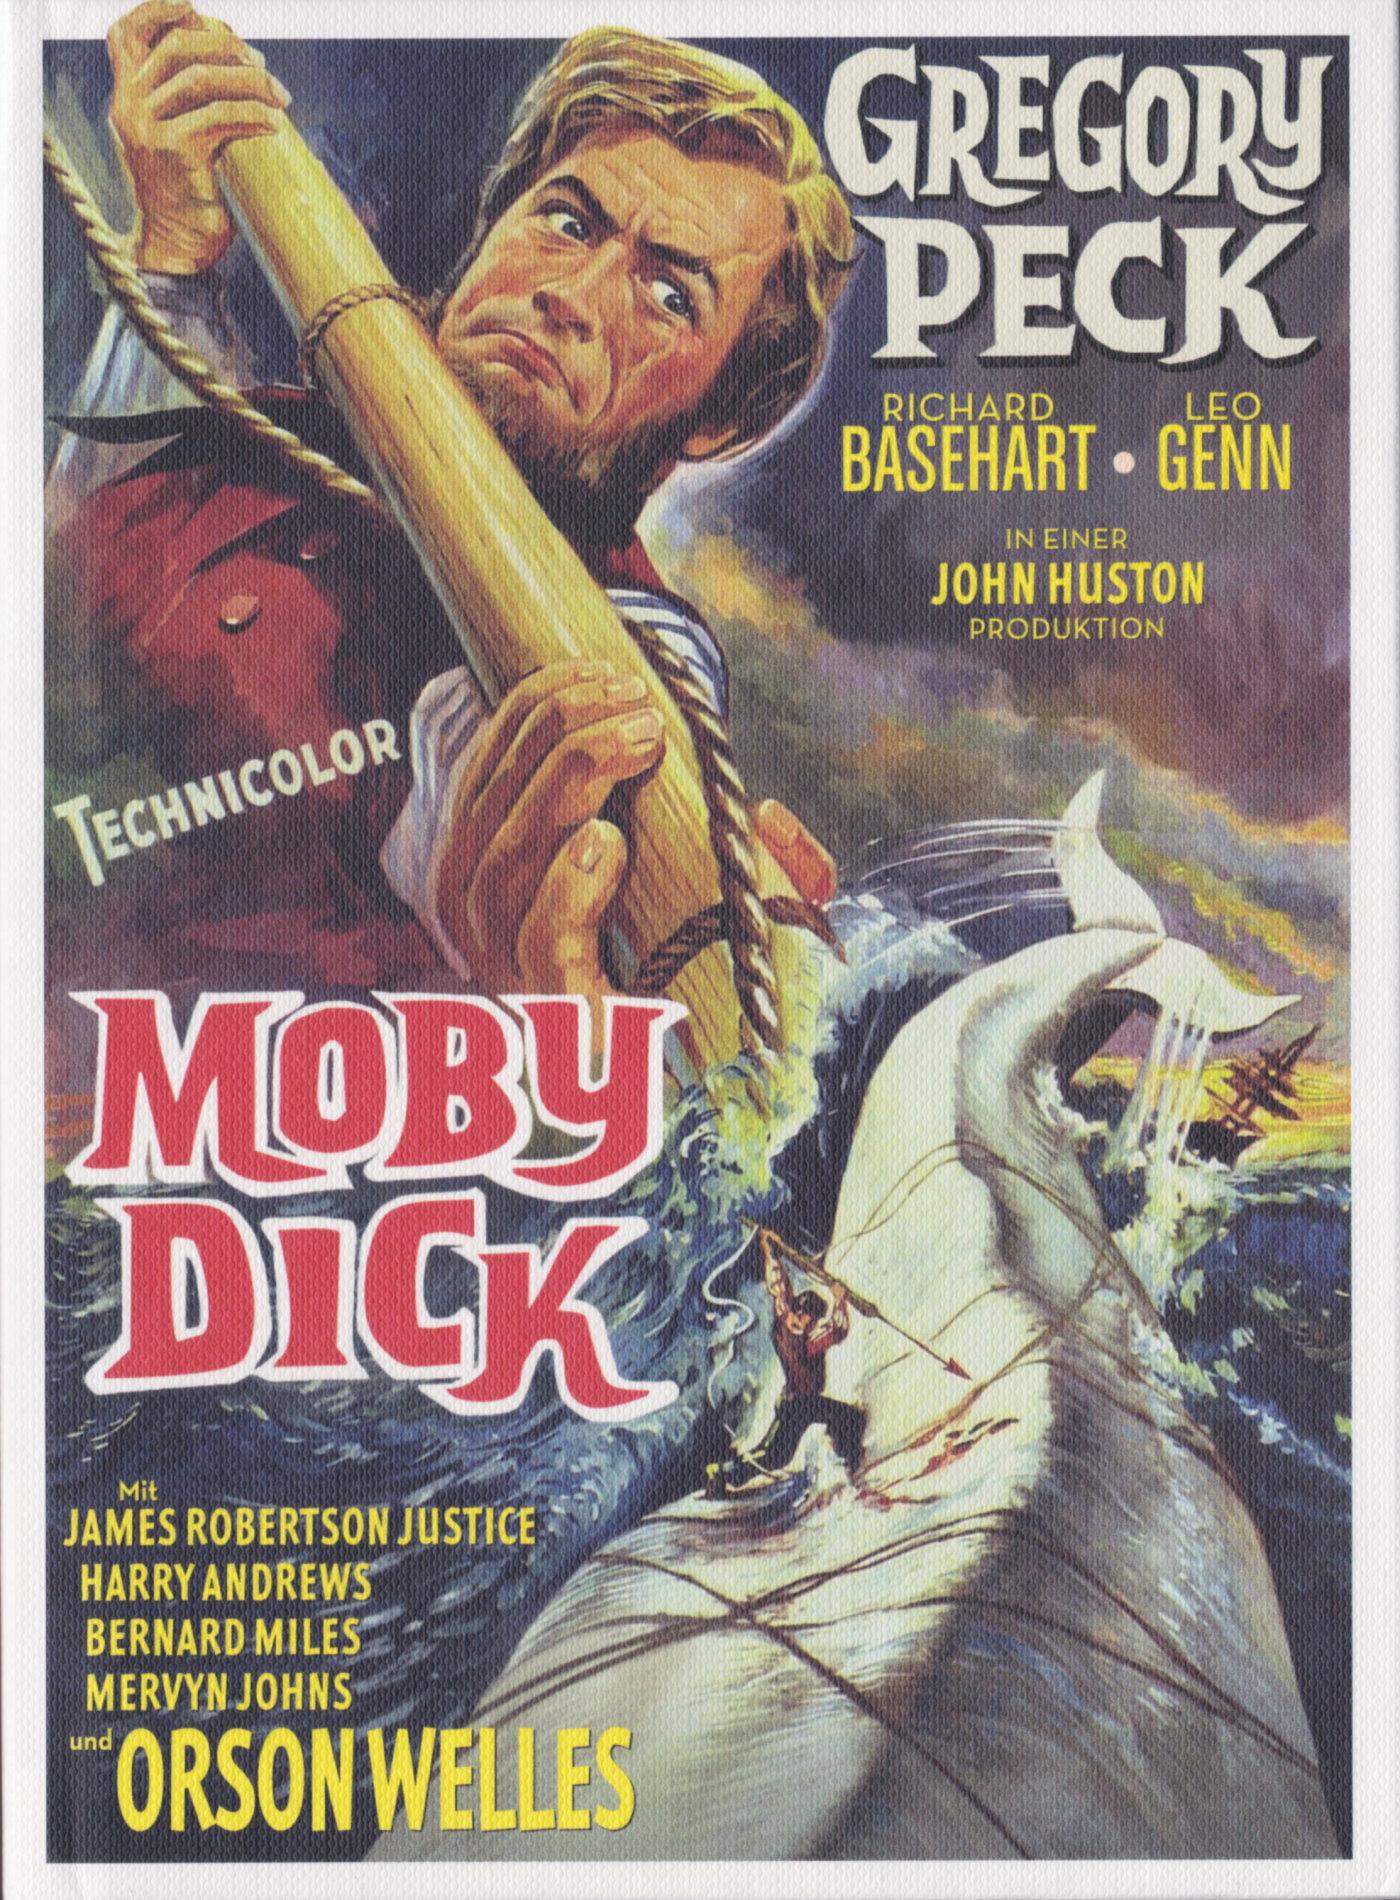 Cover - Moby Dick.jpg